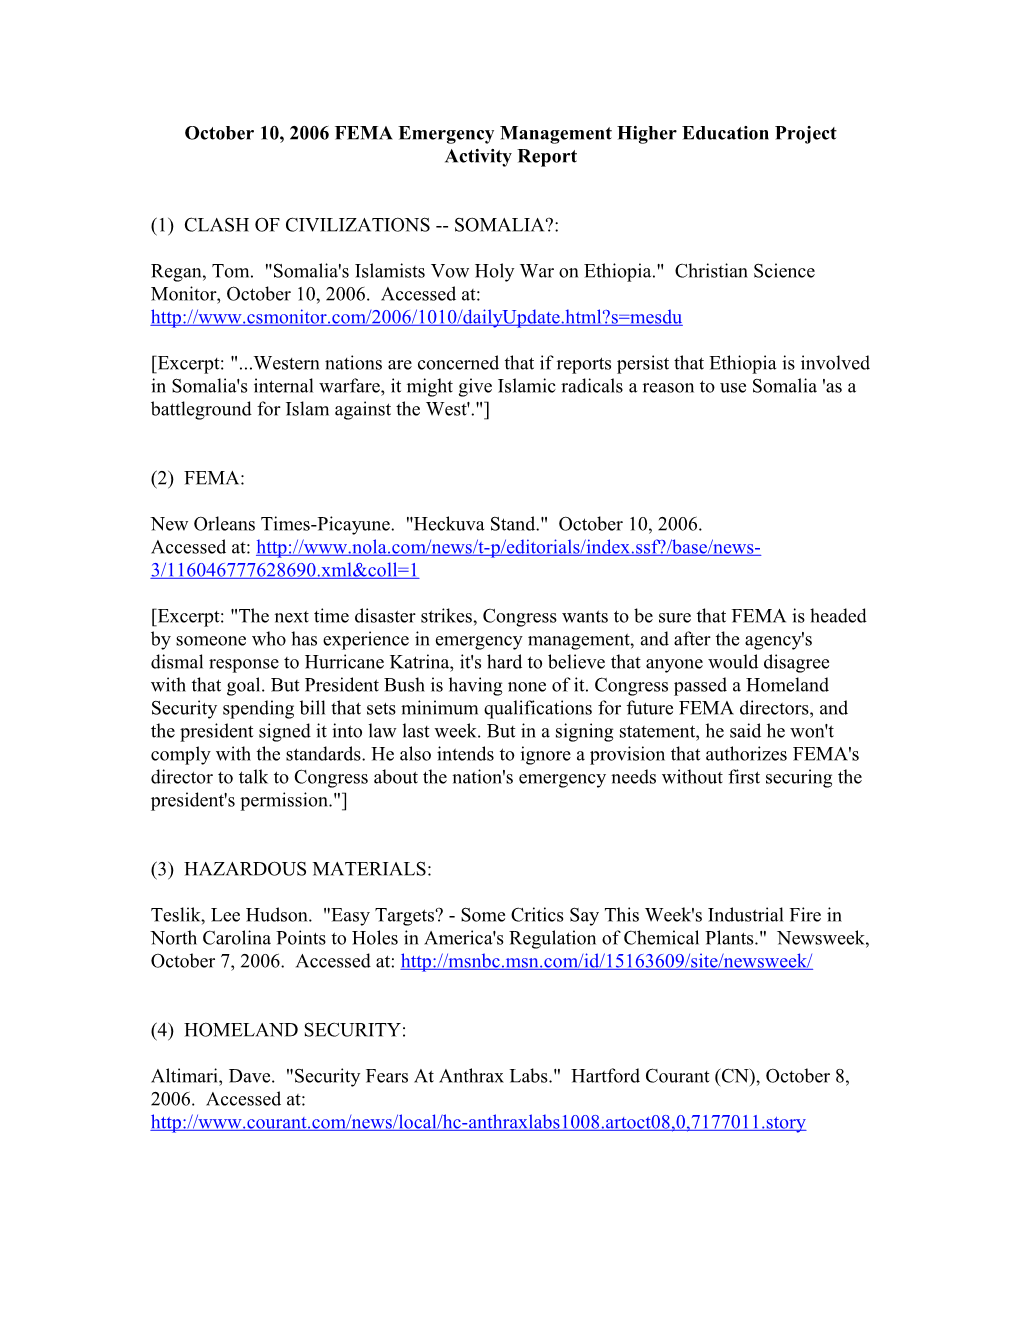 October 10, 2006 FEMA Emergency Management Higher Education Project Activity Report